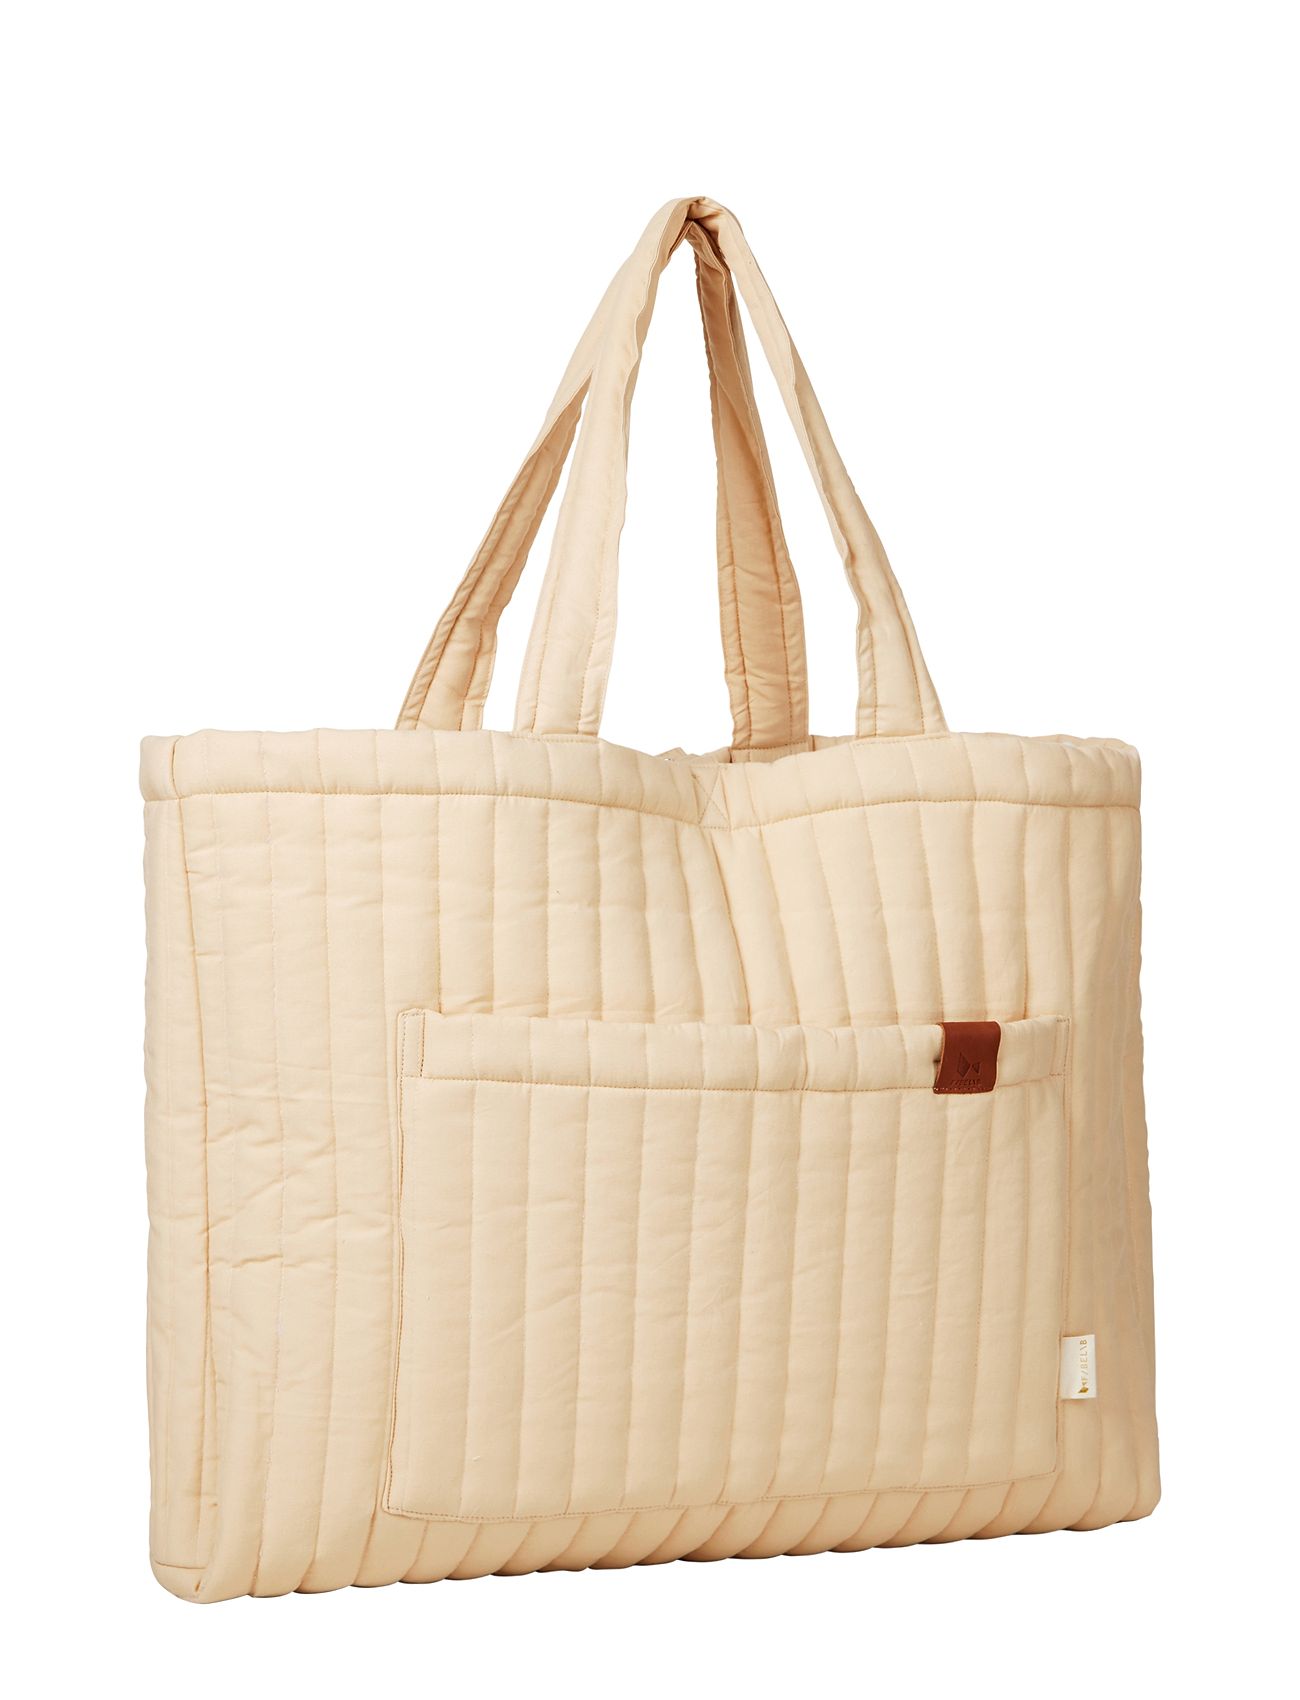 Quilted Tote Bag - Wheat Baby & Maternity Care & Hygiene Changing Bags Coral Fabelab